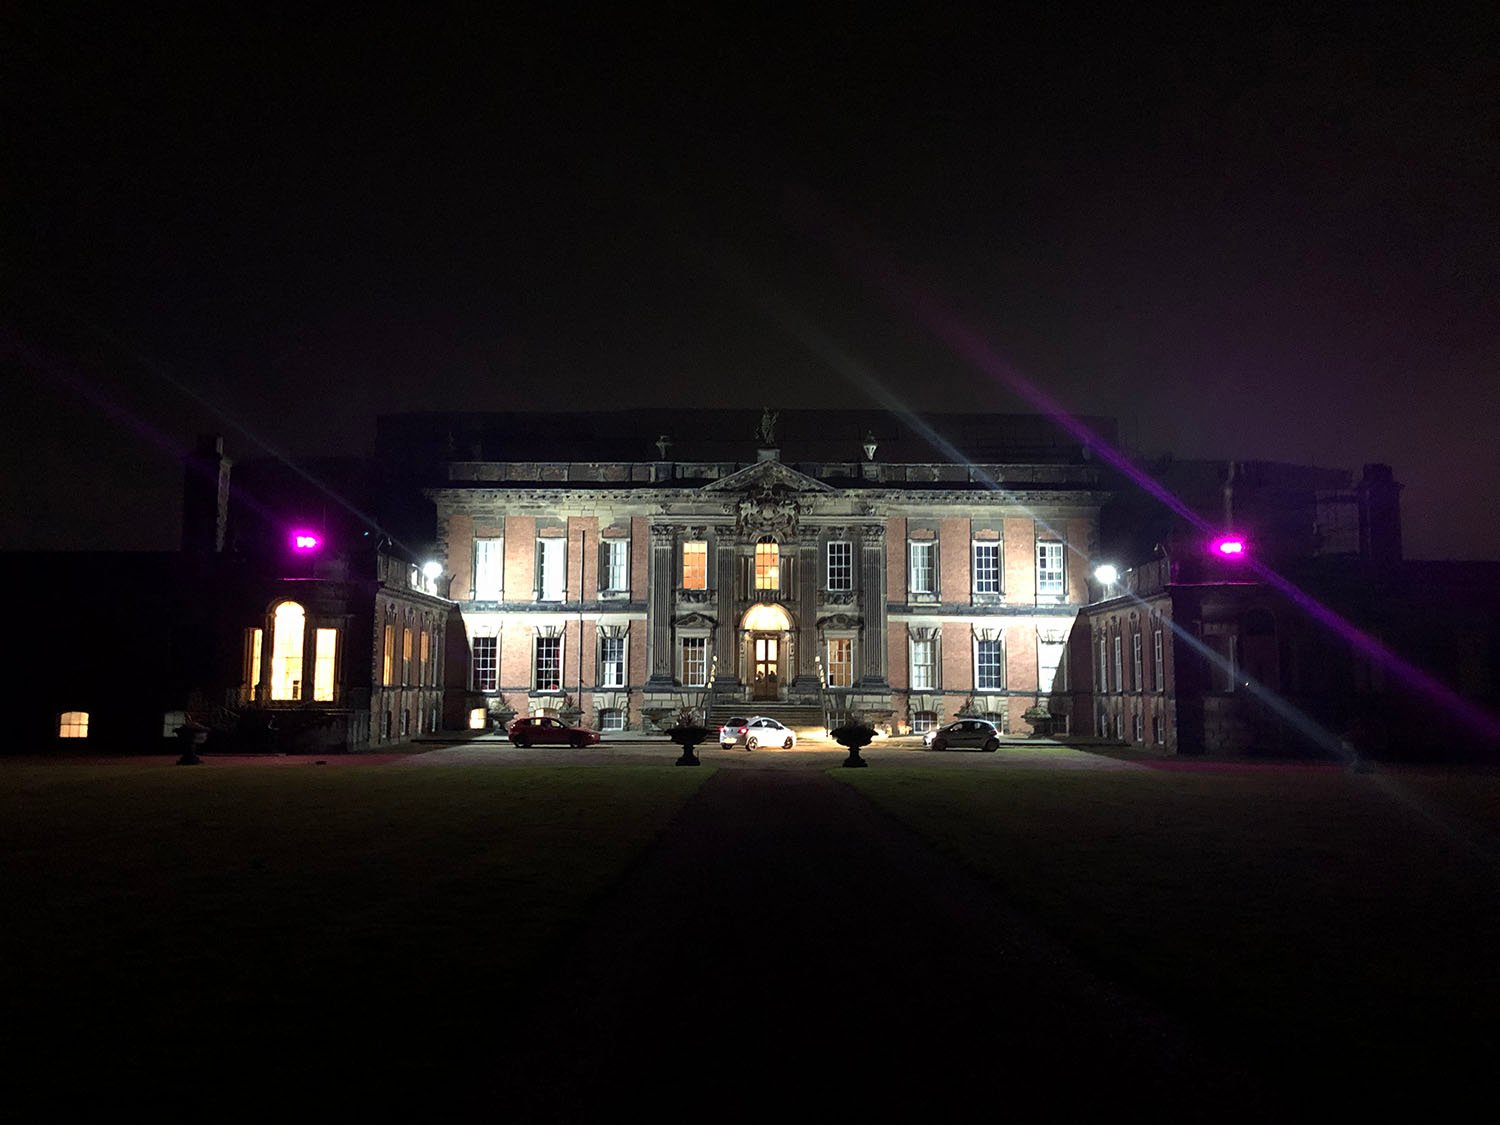 Image name wentworth woodhouse at night resized the 27 image from the post Dr Emma Wells, on the largest private dwelling in the UK: Wentworth Woodhouse in Yorkshire.com.